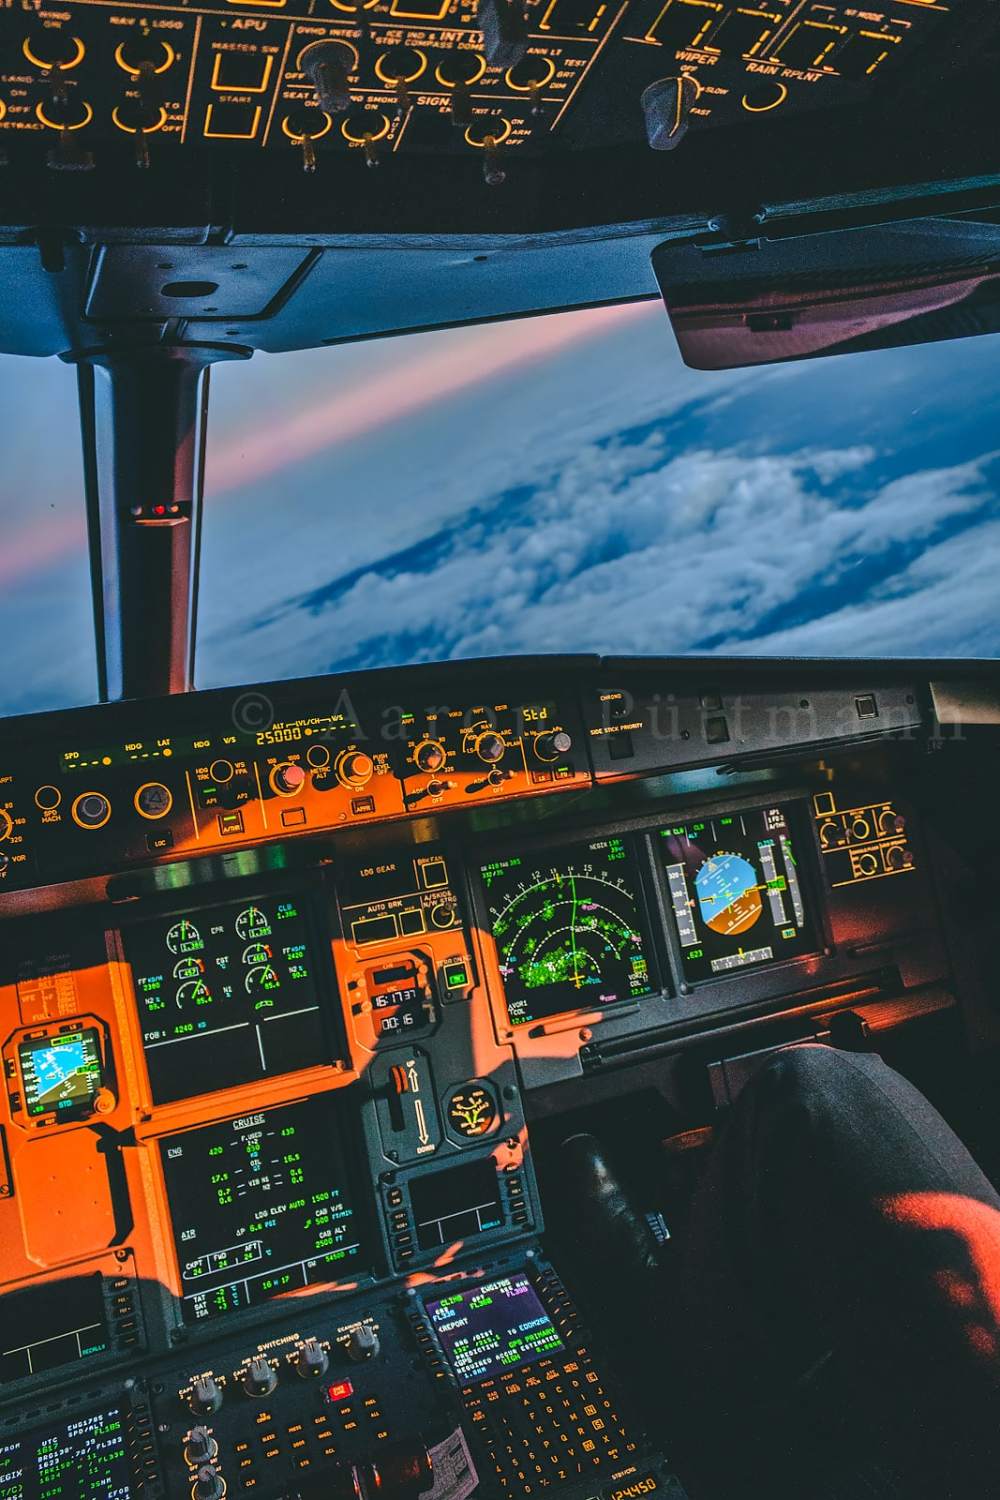 Wallpaper ID 208791  two pilots in an airplane cockpit during take off  pilots taking off 4k wallpaper free download